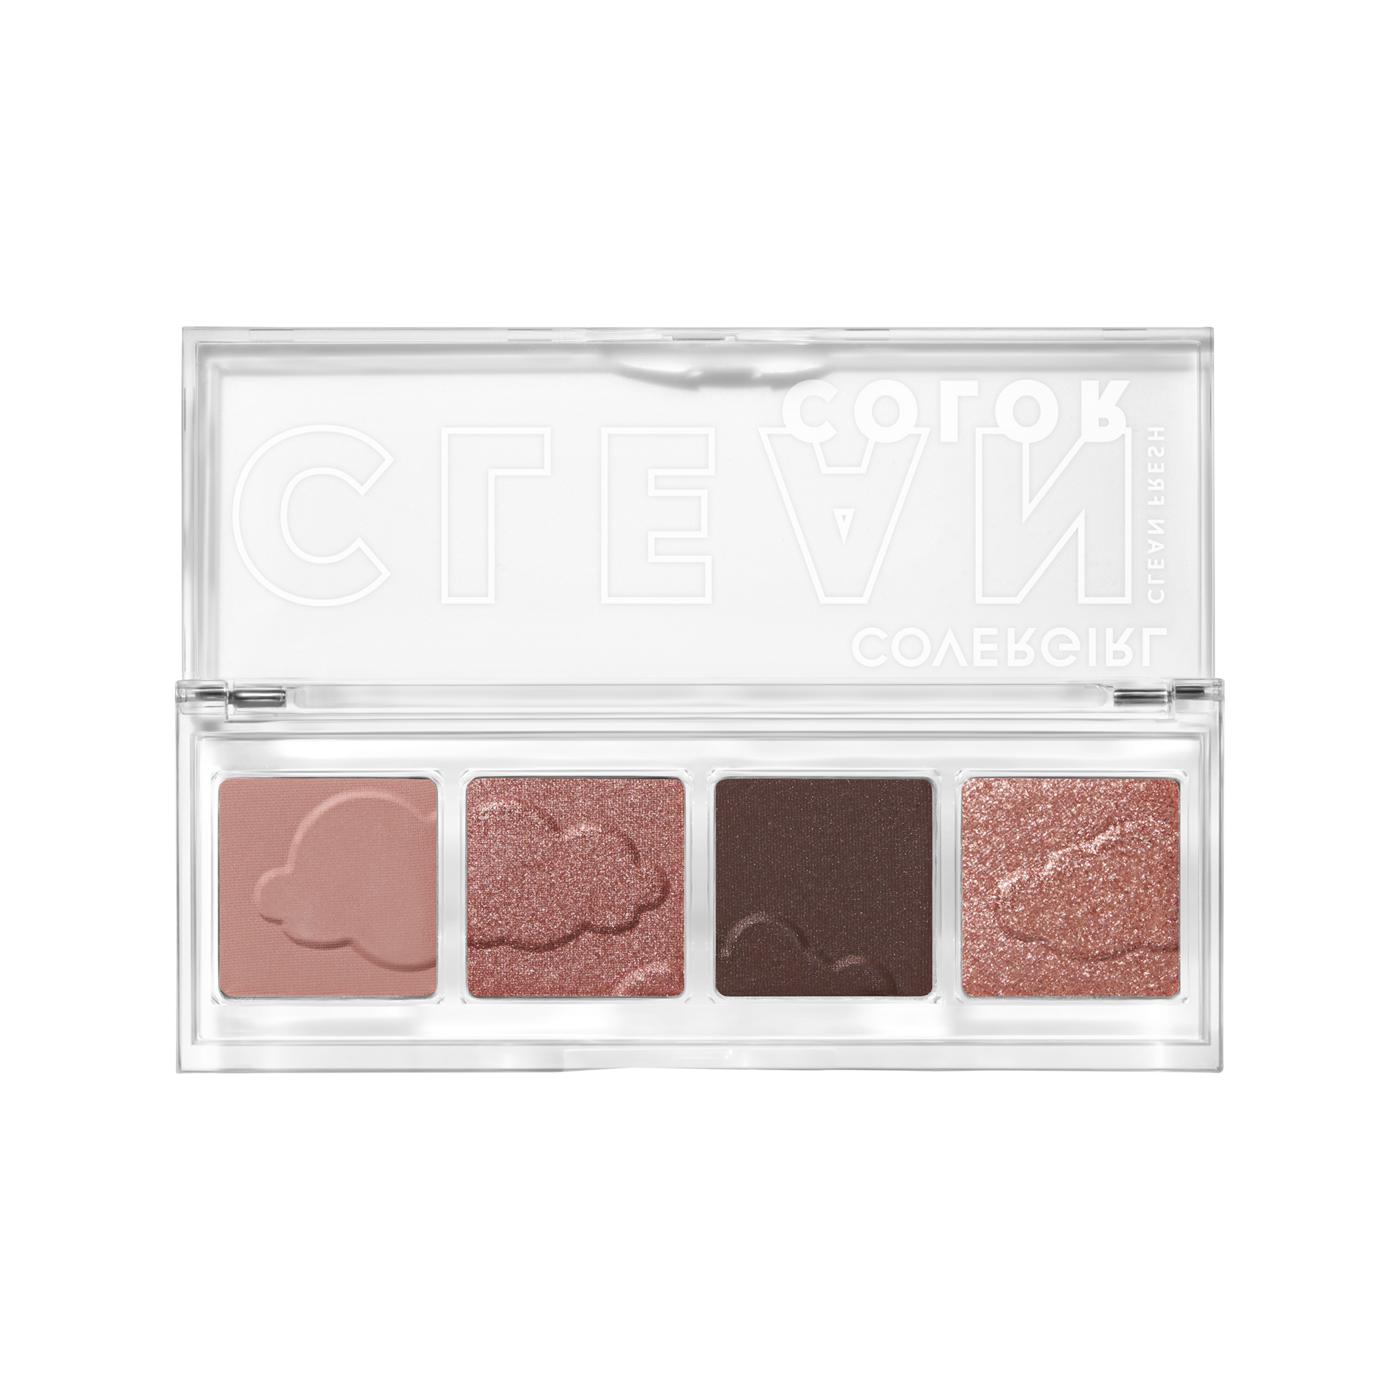 Covergirl Clean Fresh Color Eyeshadow - Cool Berry; image 10 of 10